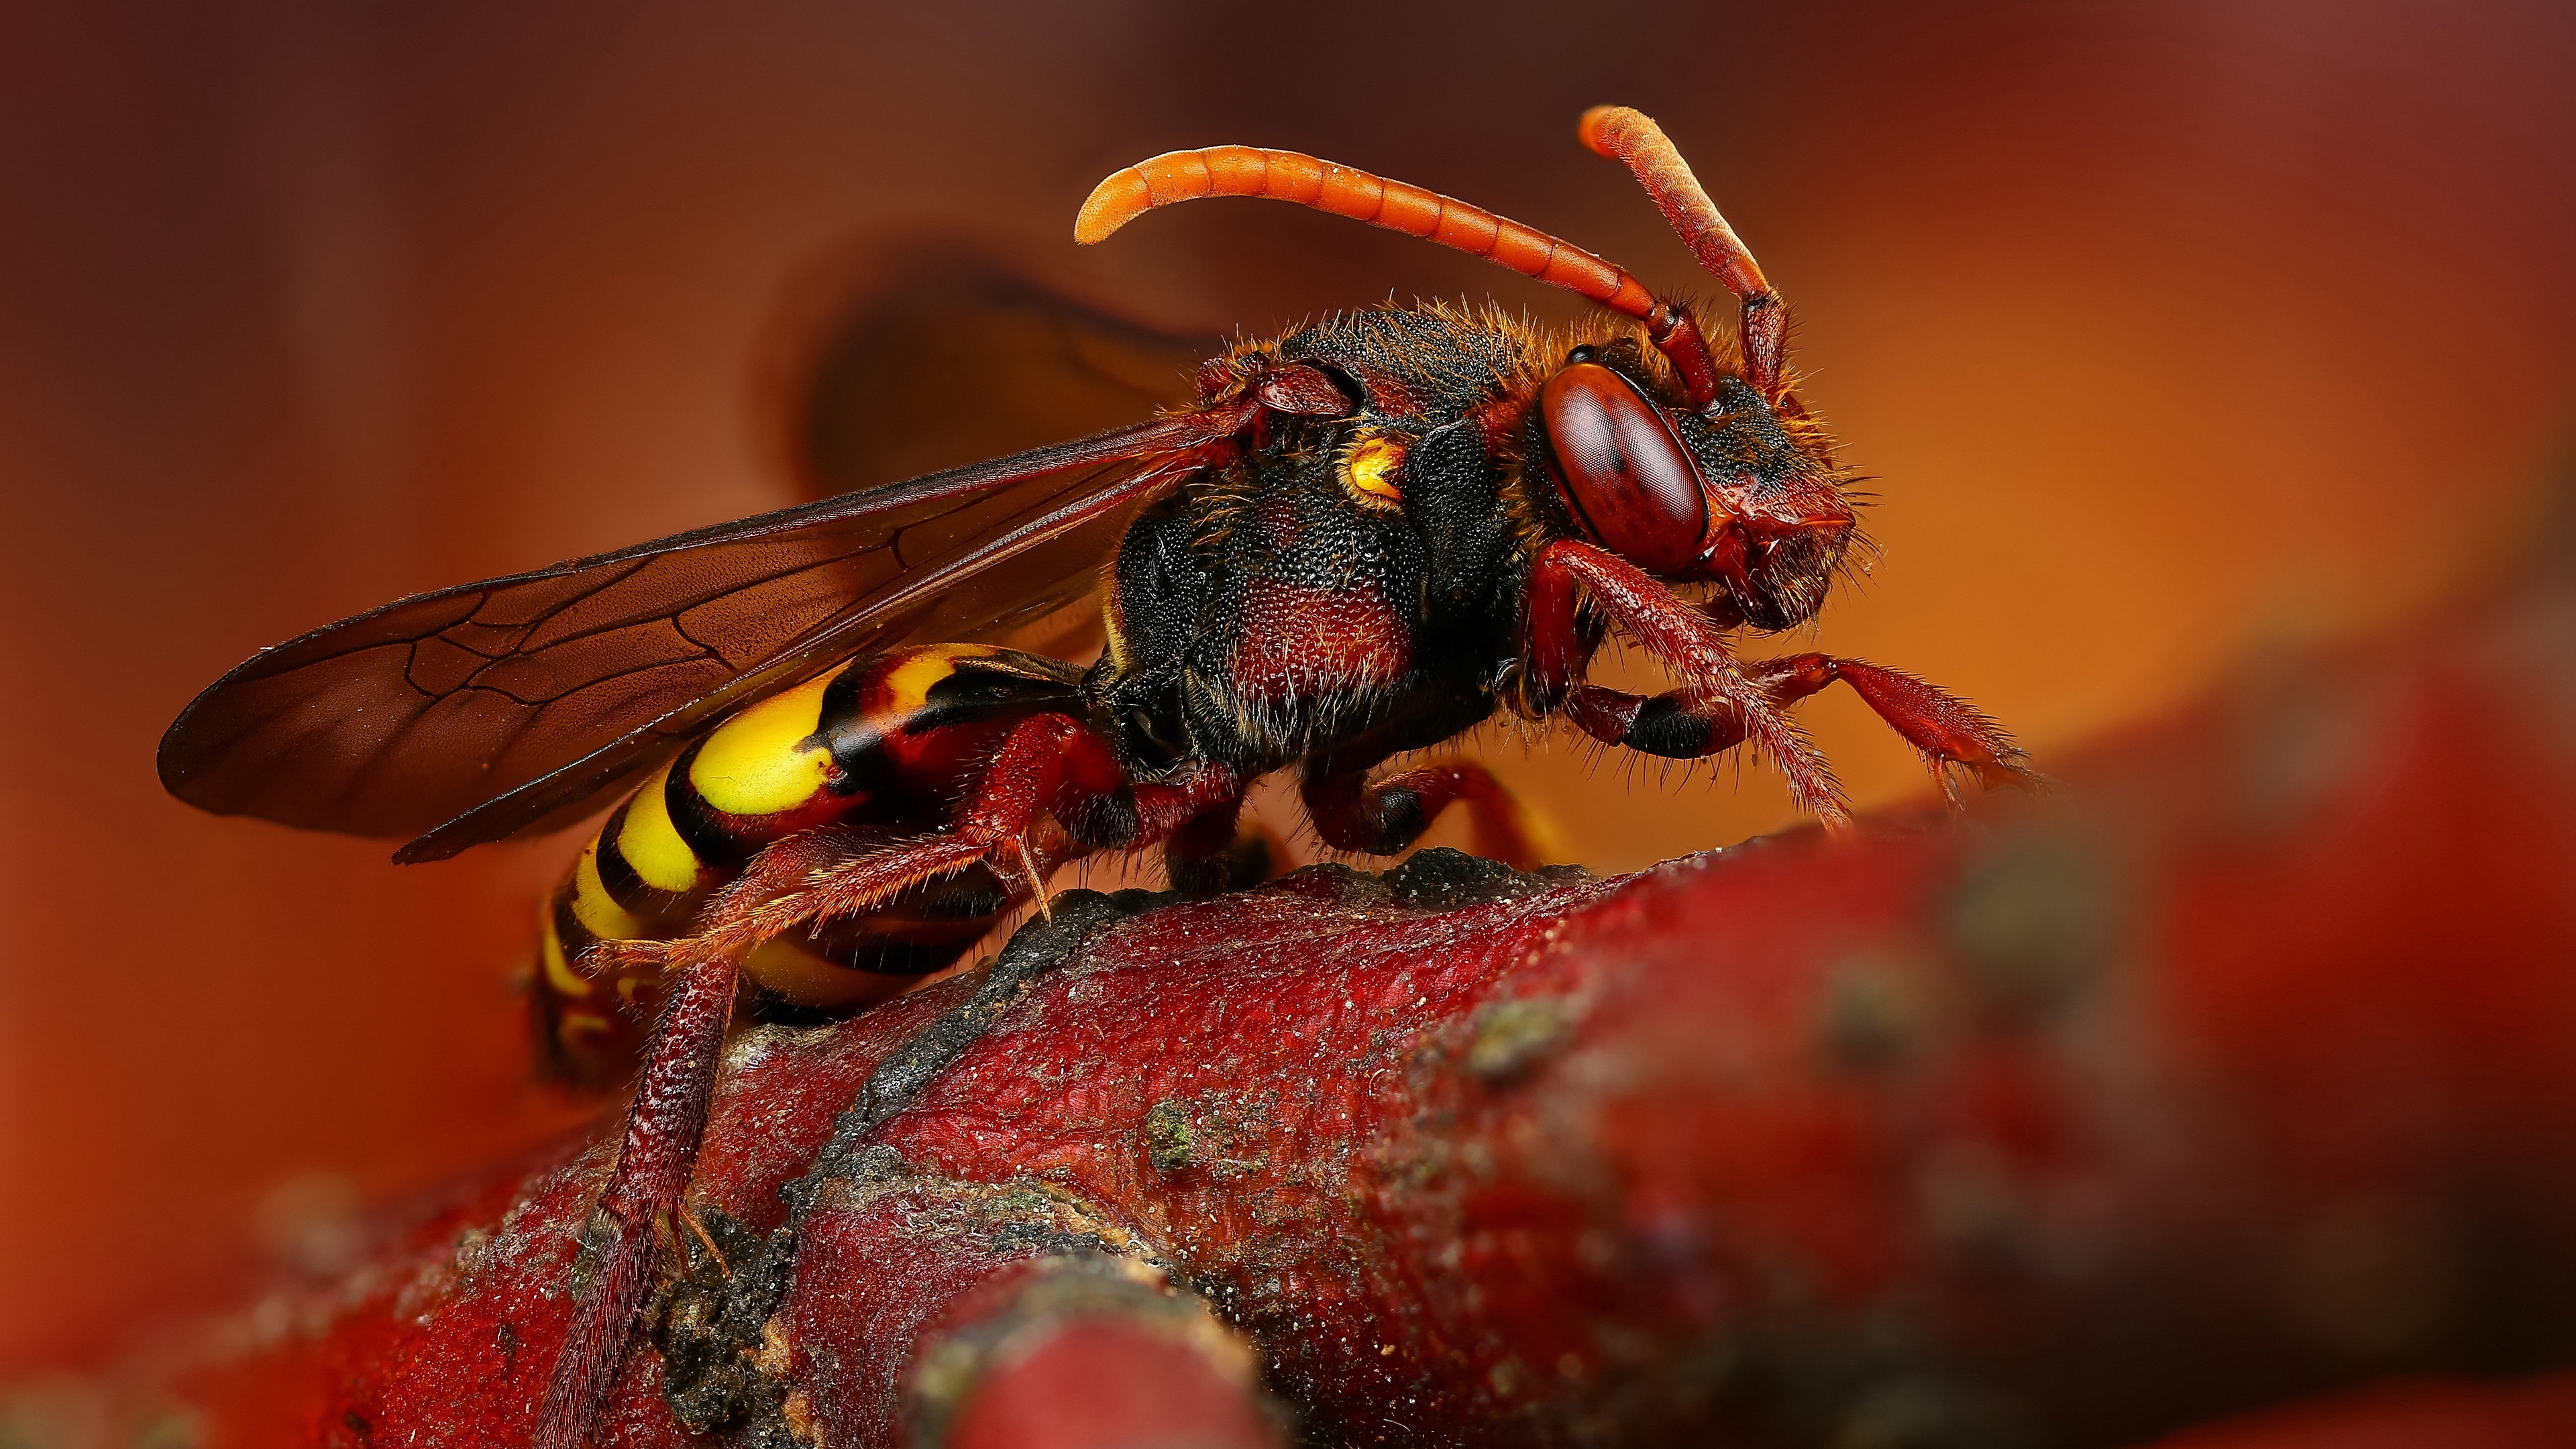 Wasp wallpapers, Insect beauty, Nature's tiny warriors, 4K resolution, 3840x2160 4K Desktop